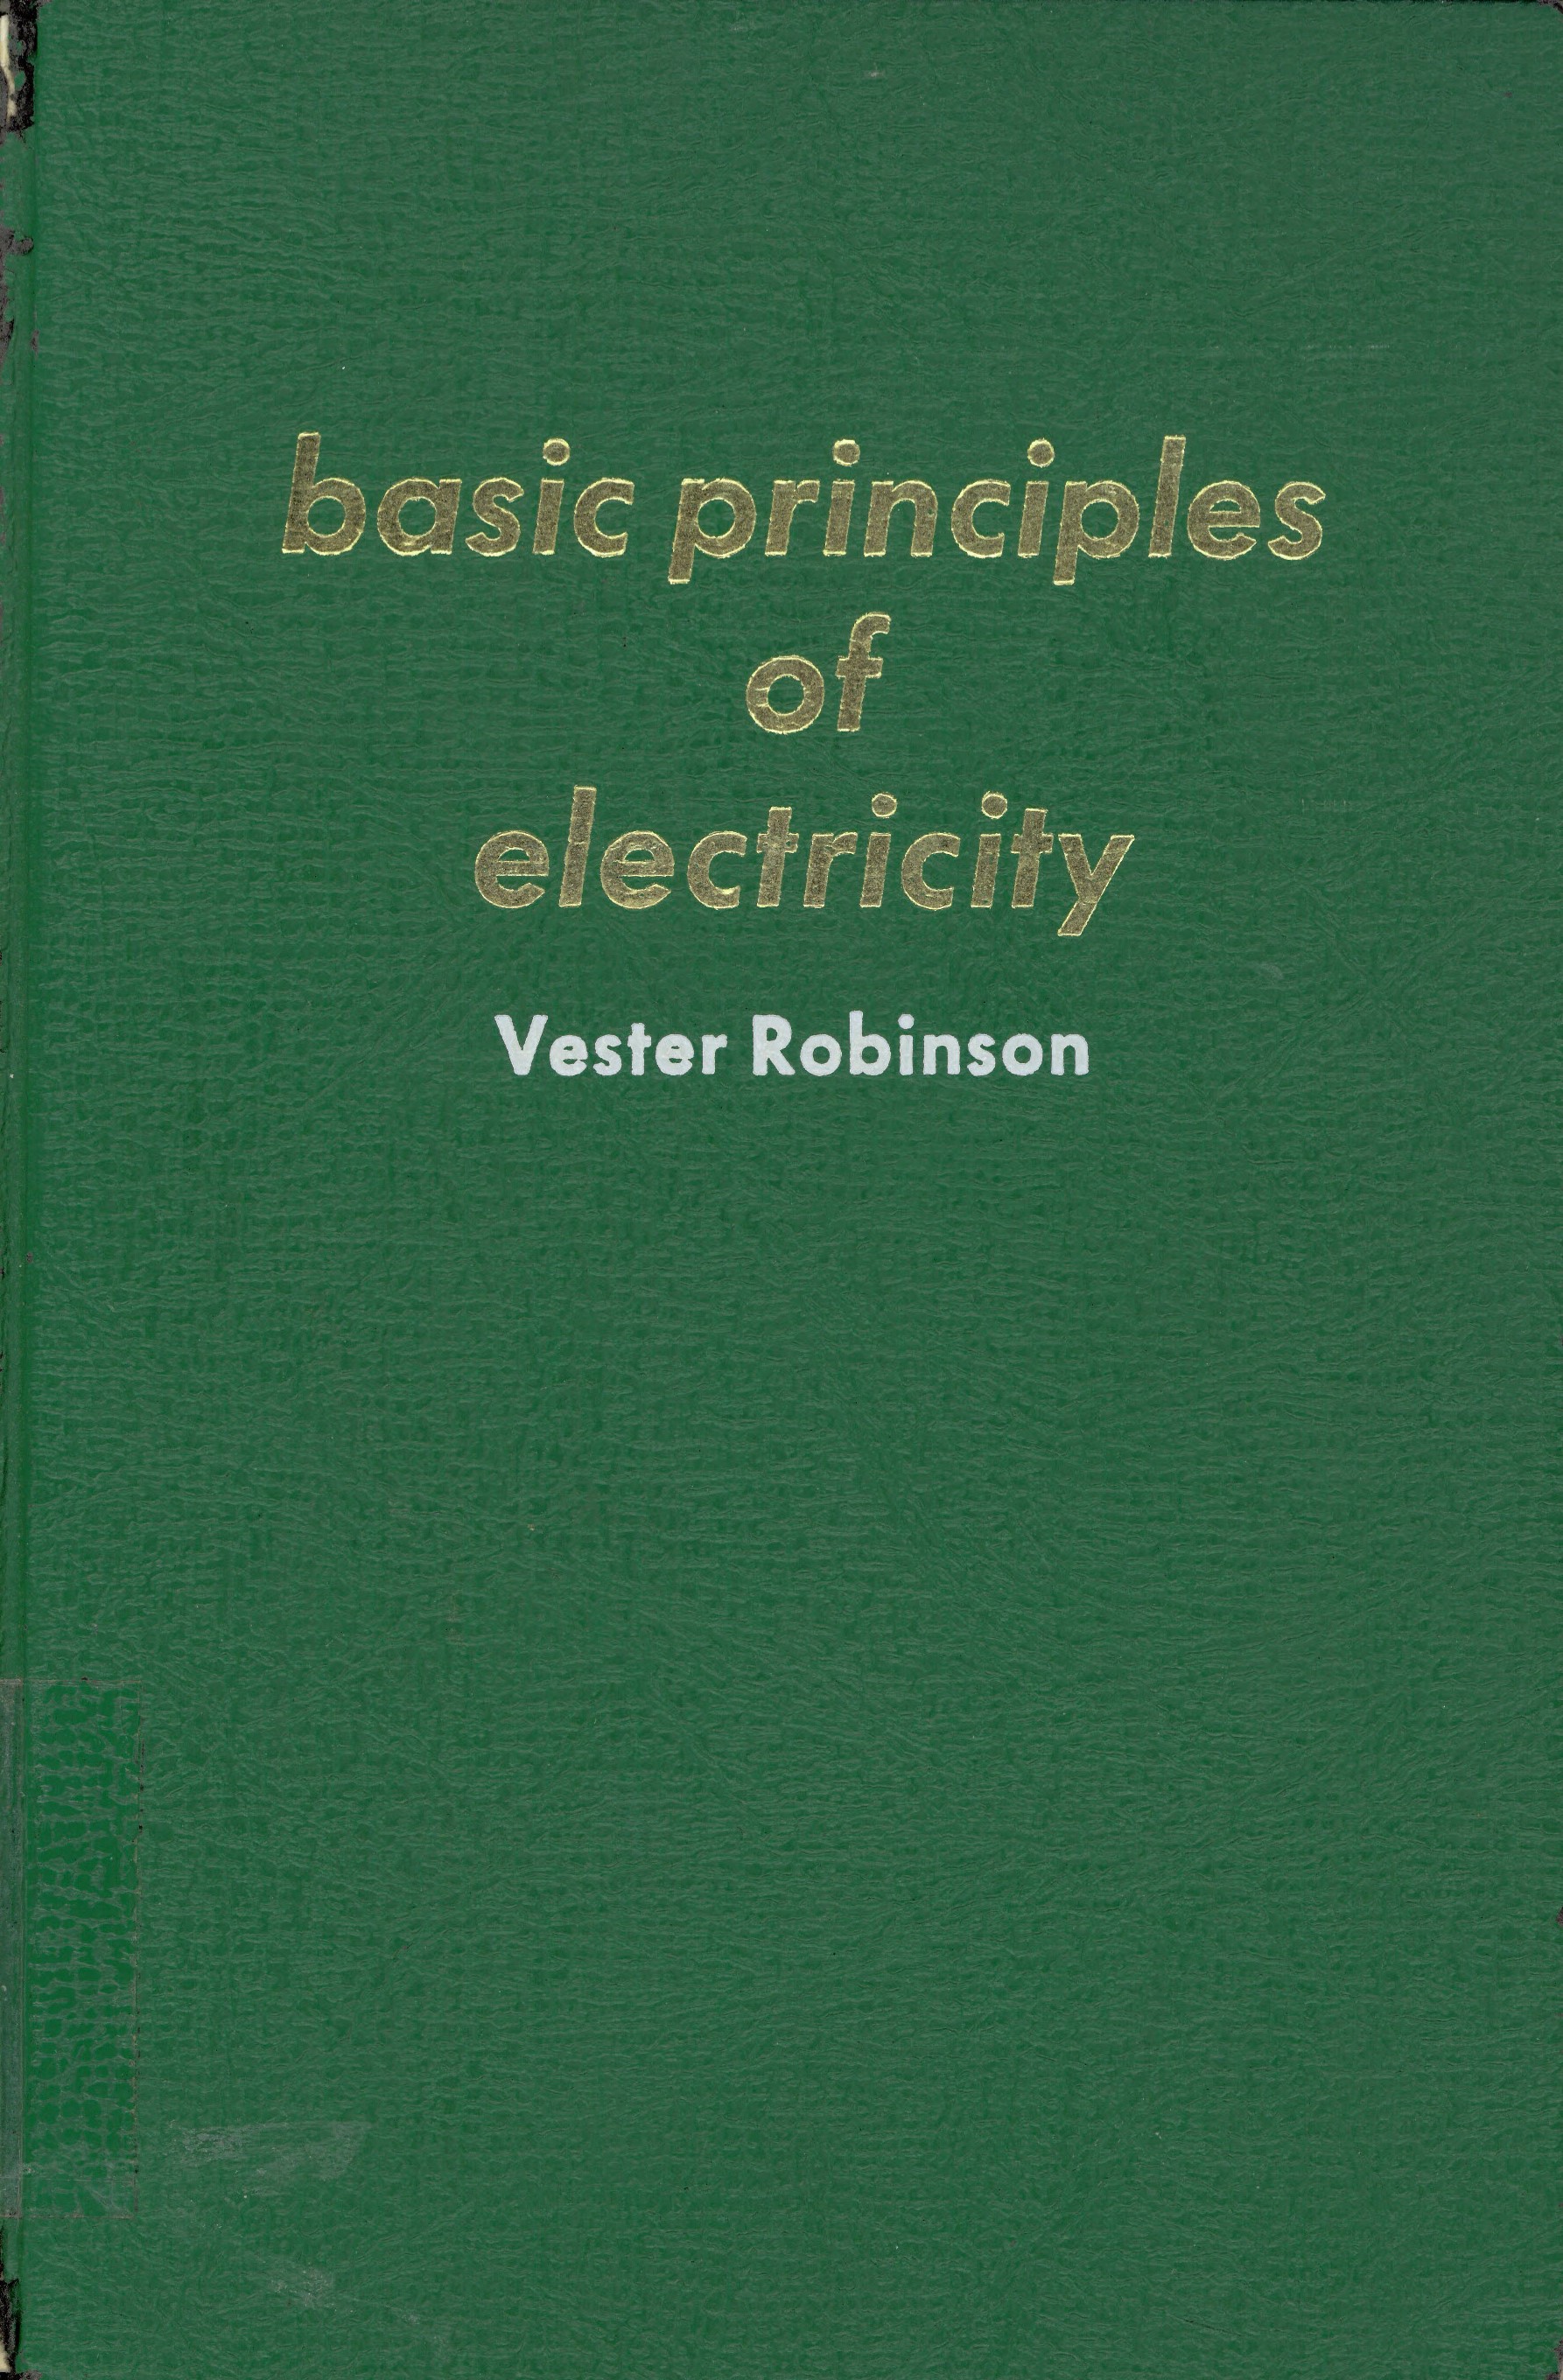 Basic principles of electricity.